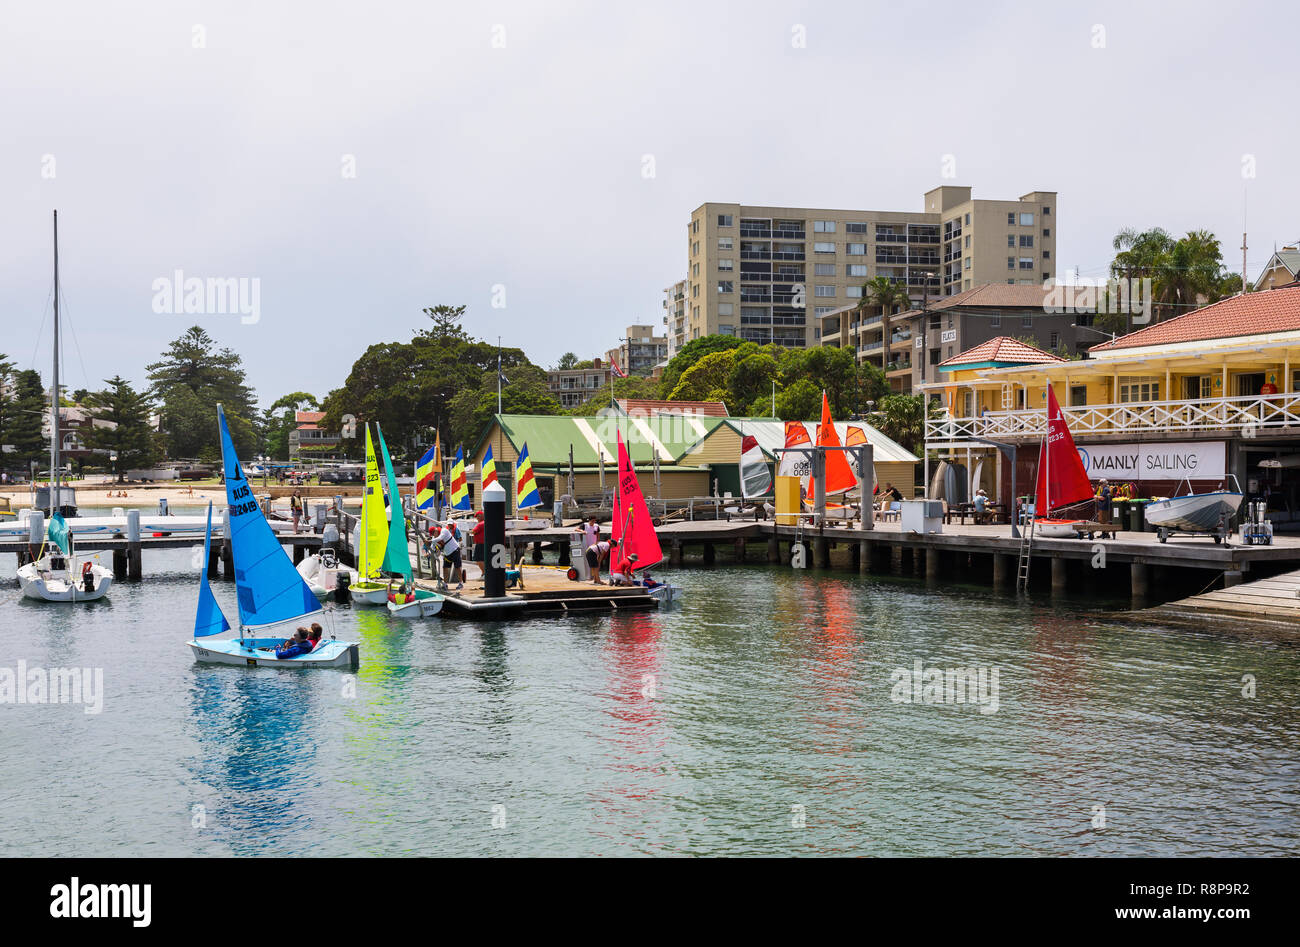 Manly, New South Wales, Australia, December 15th,2018.Club members enjoying sailing activates at Manly sailing club a suburb of Sydney, Australia. Stock Photo